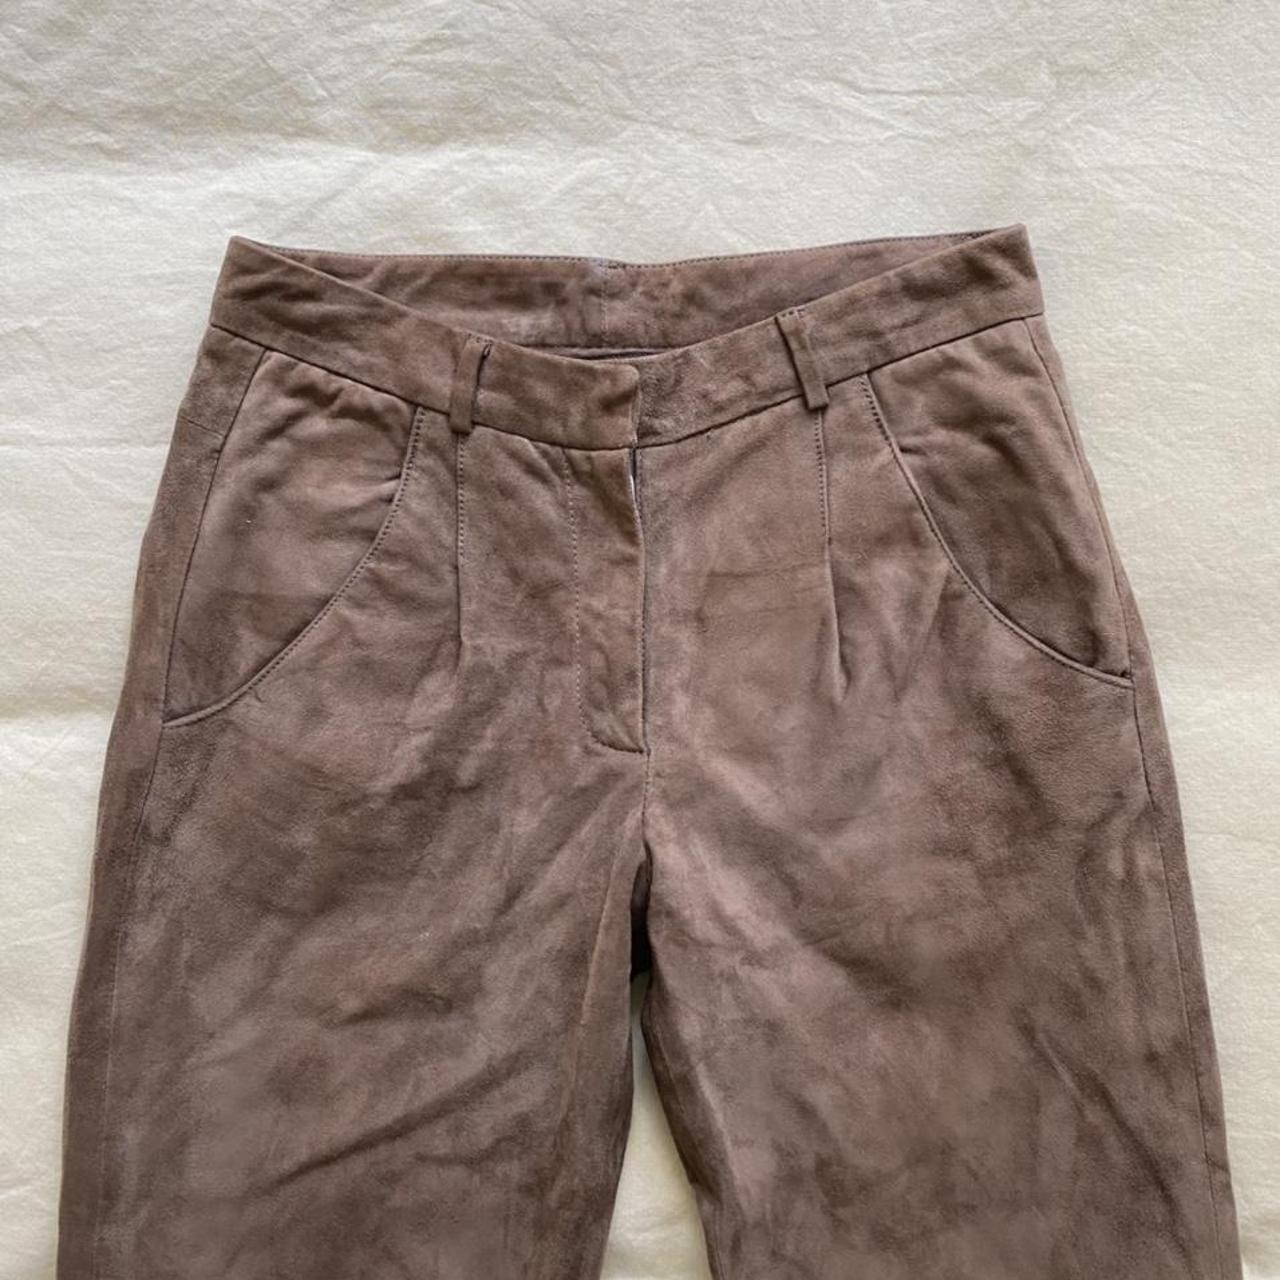 Product Image 2 - 100% italian suede leather pants